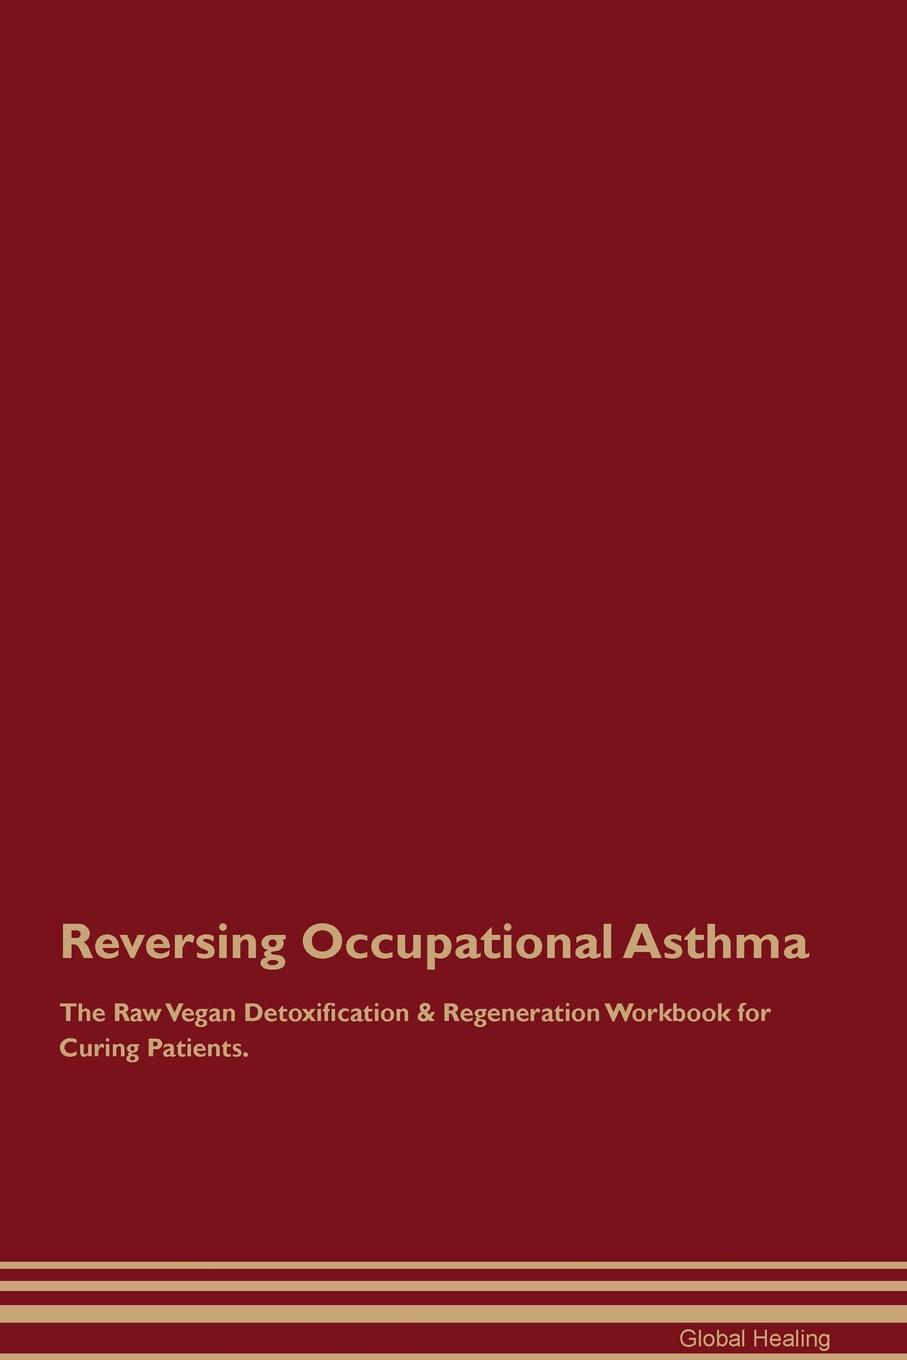 Reversing Occupational Asthma The Raw Vegan Detoxification & Regeneration Workbook for Curing Patients